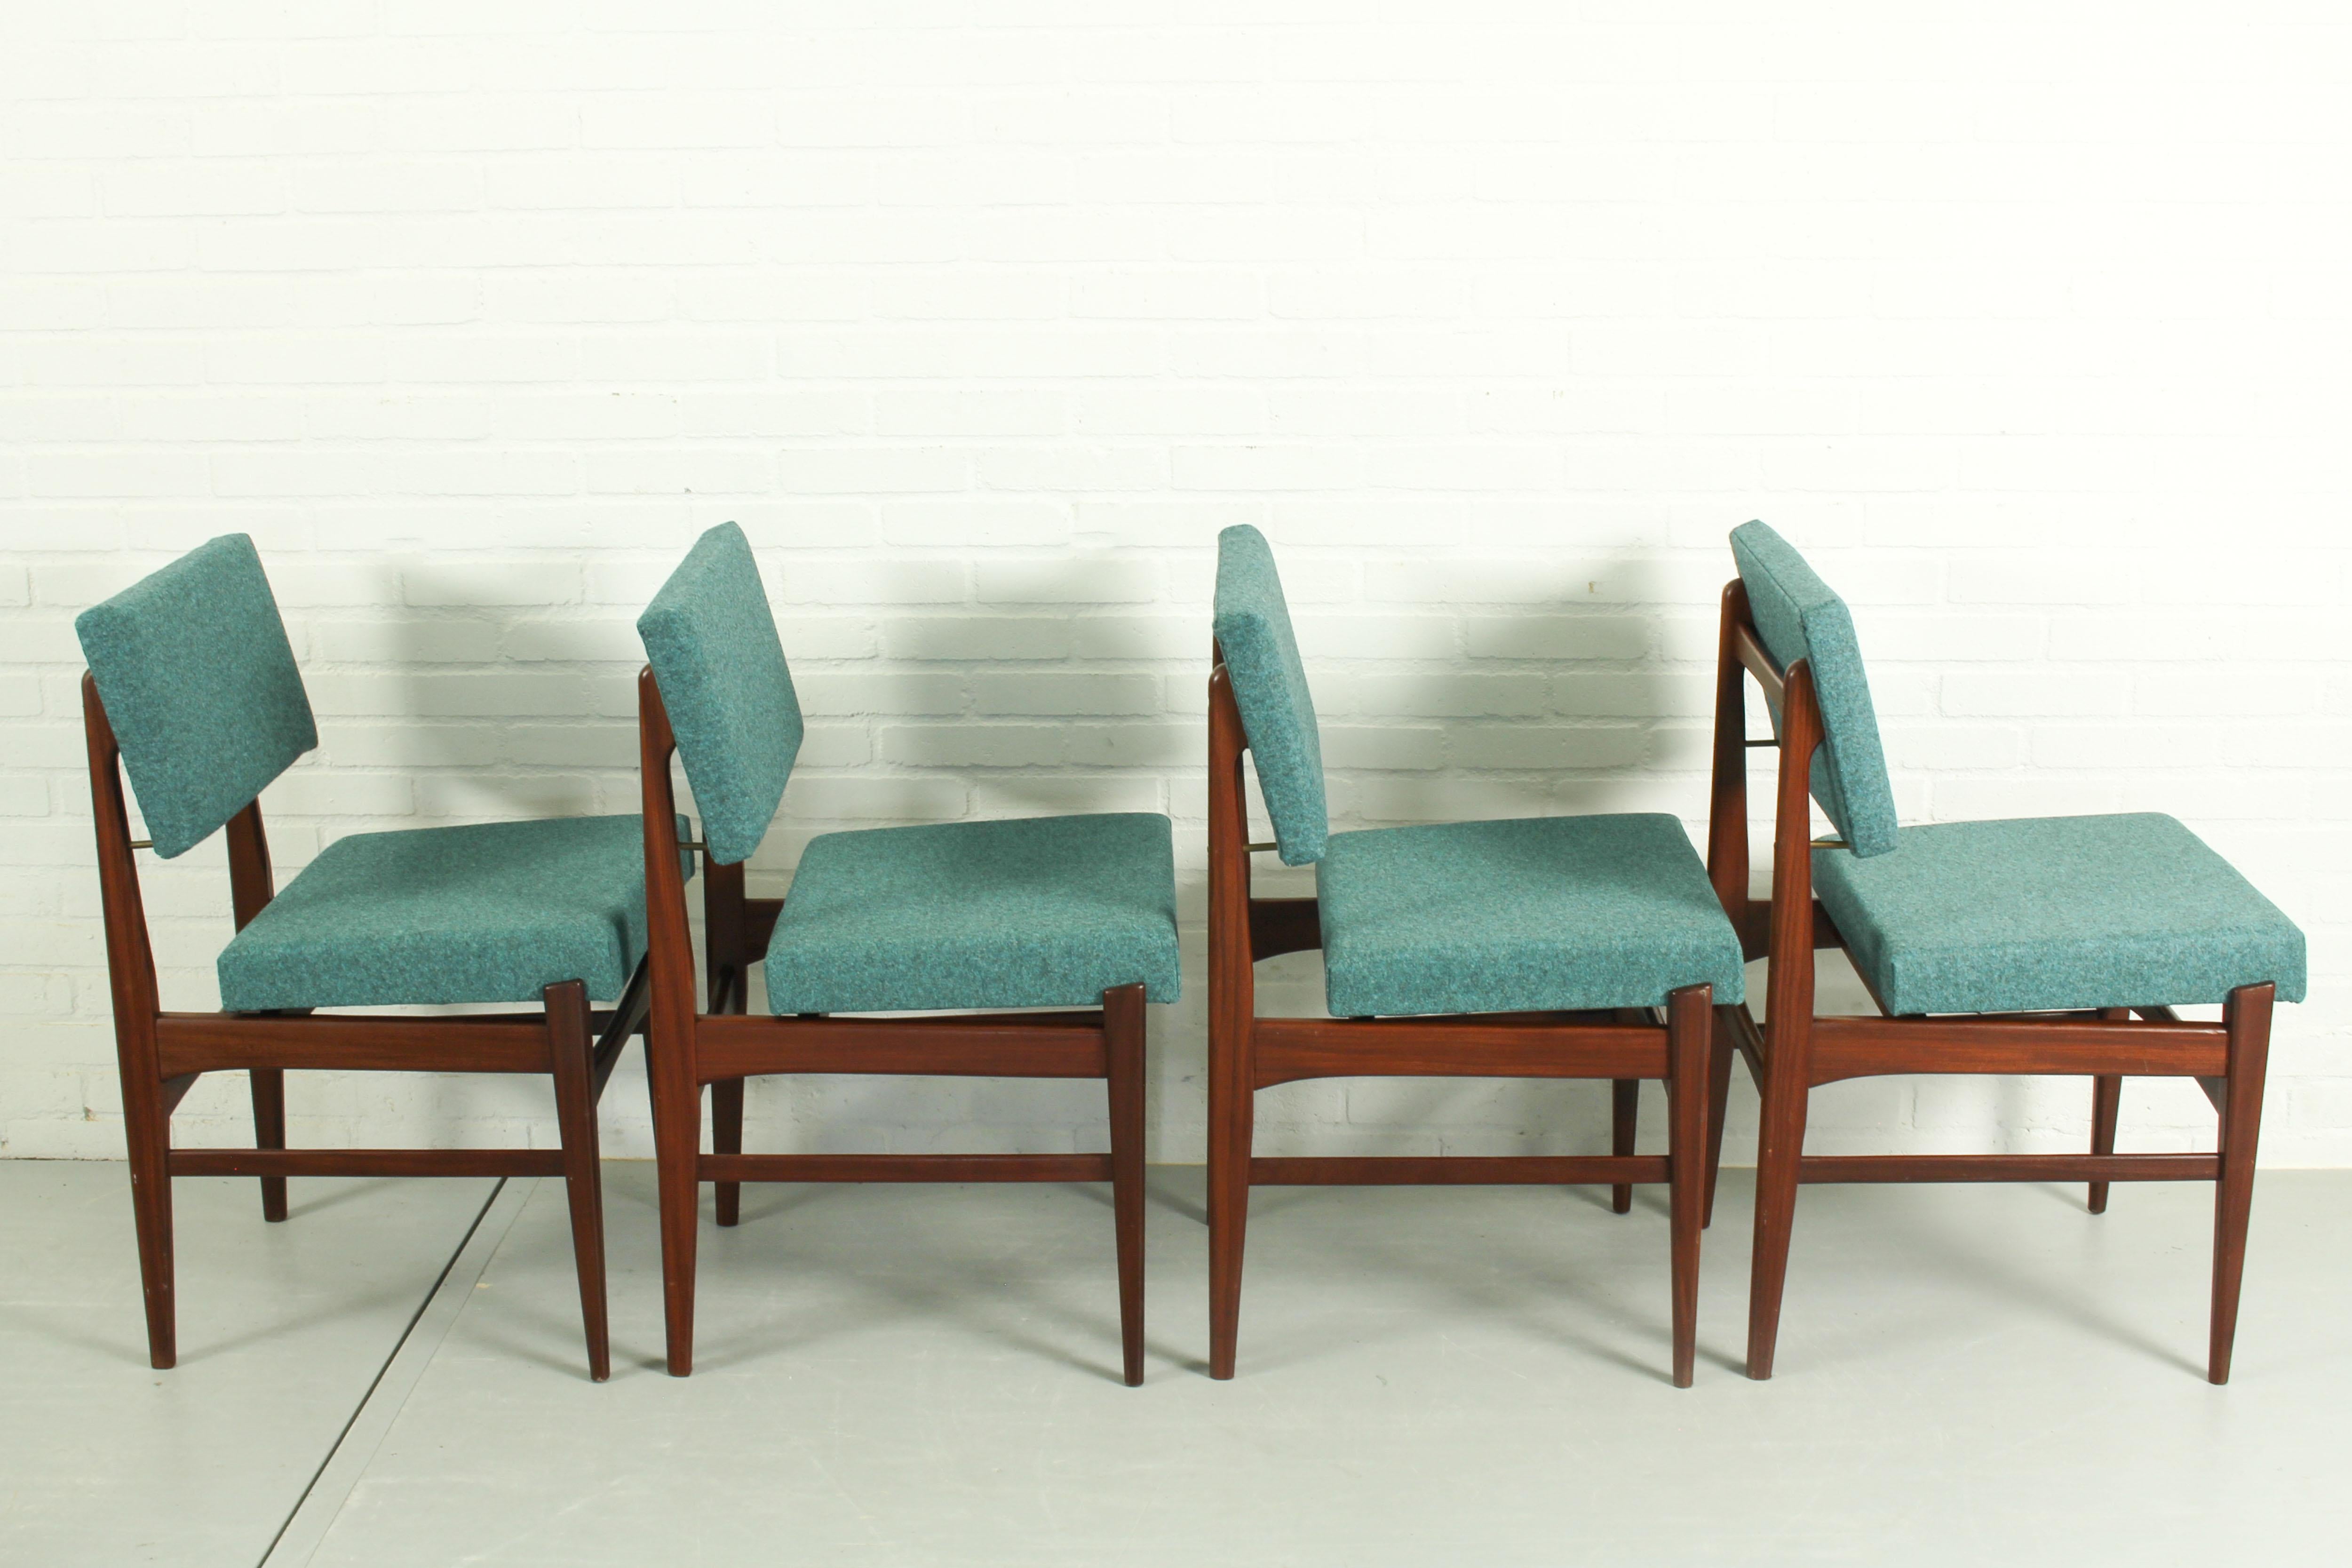 20th Century Dining chairs and Dining Table by Louis van Teeffelen for Wébé, The Netherlands  For Sale